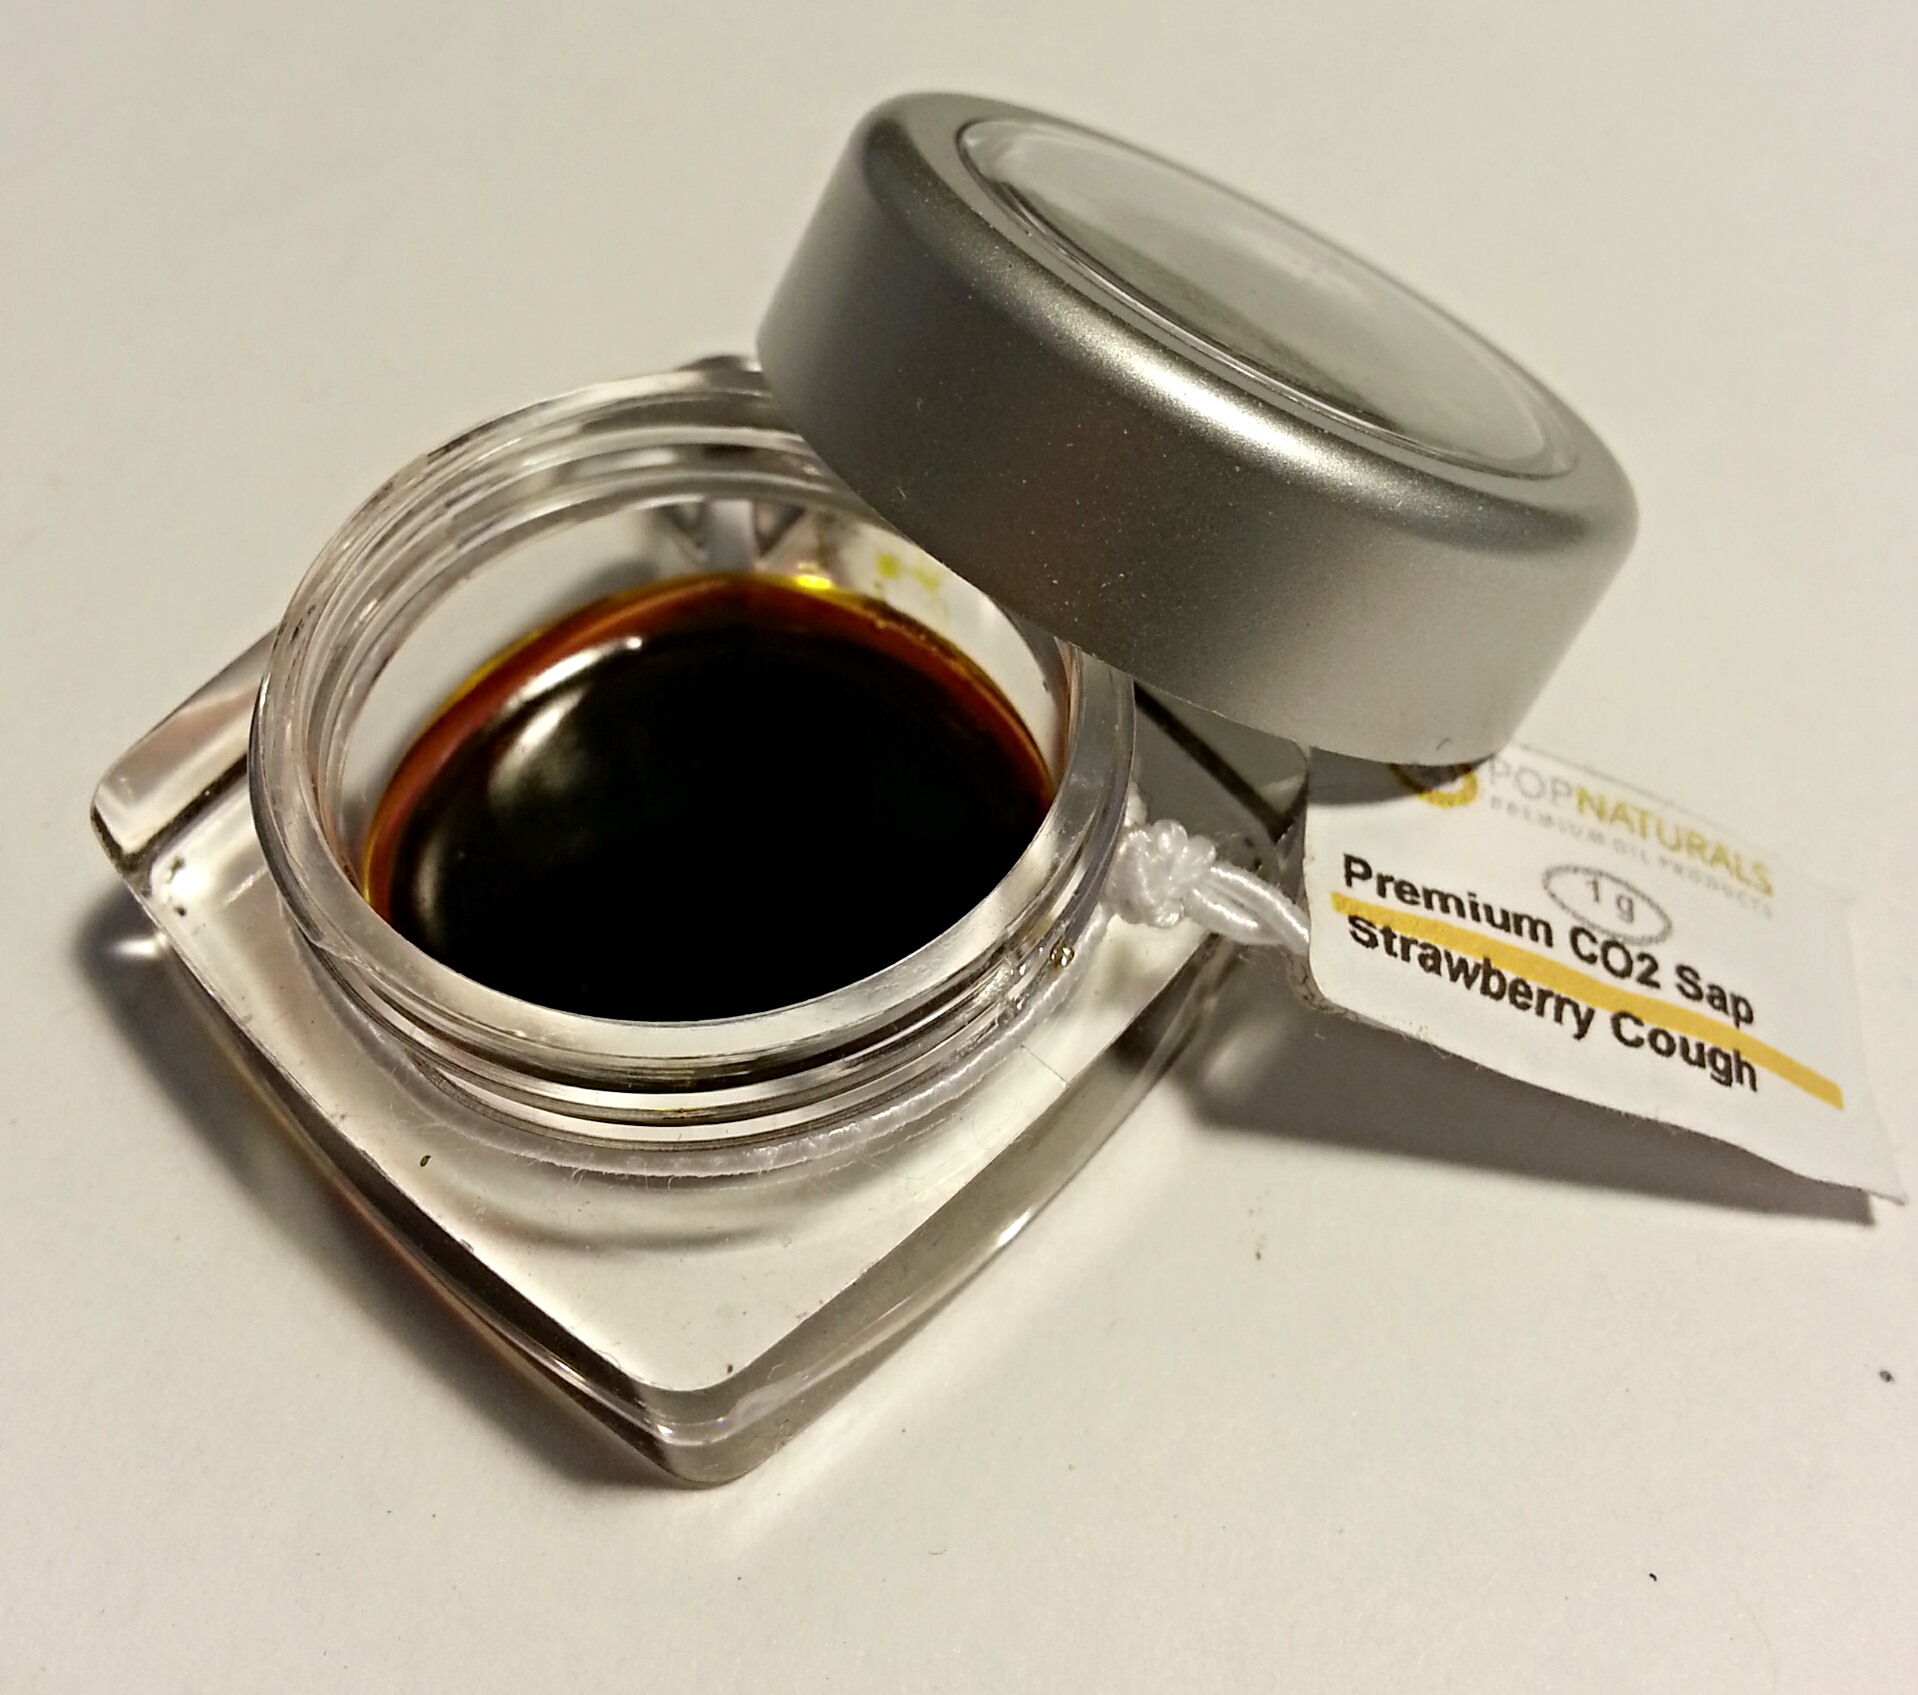 Strawberry Cough CO2 Sap from OCPC Concentrate Review